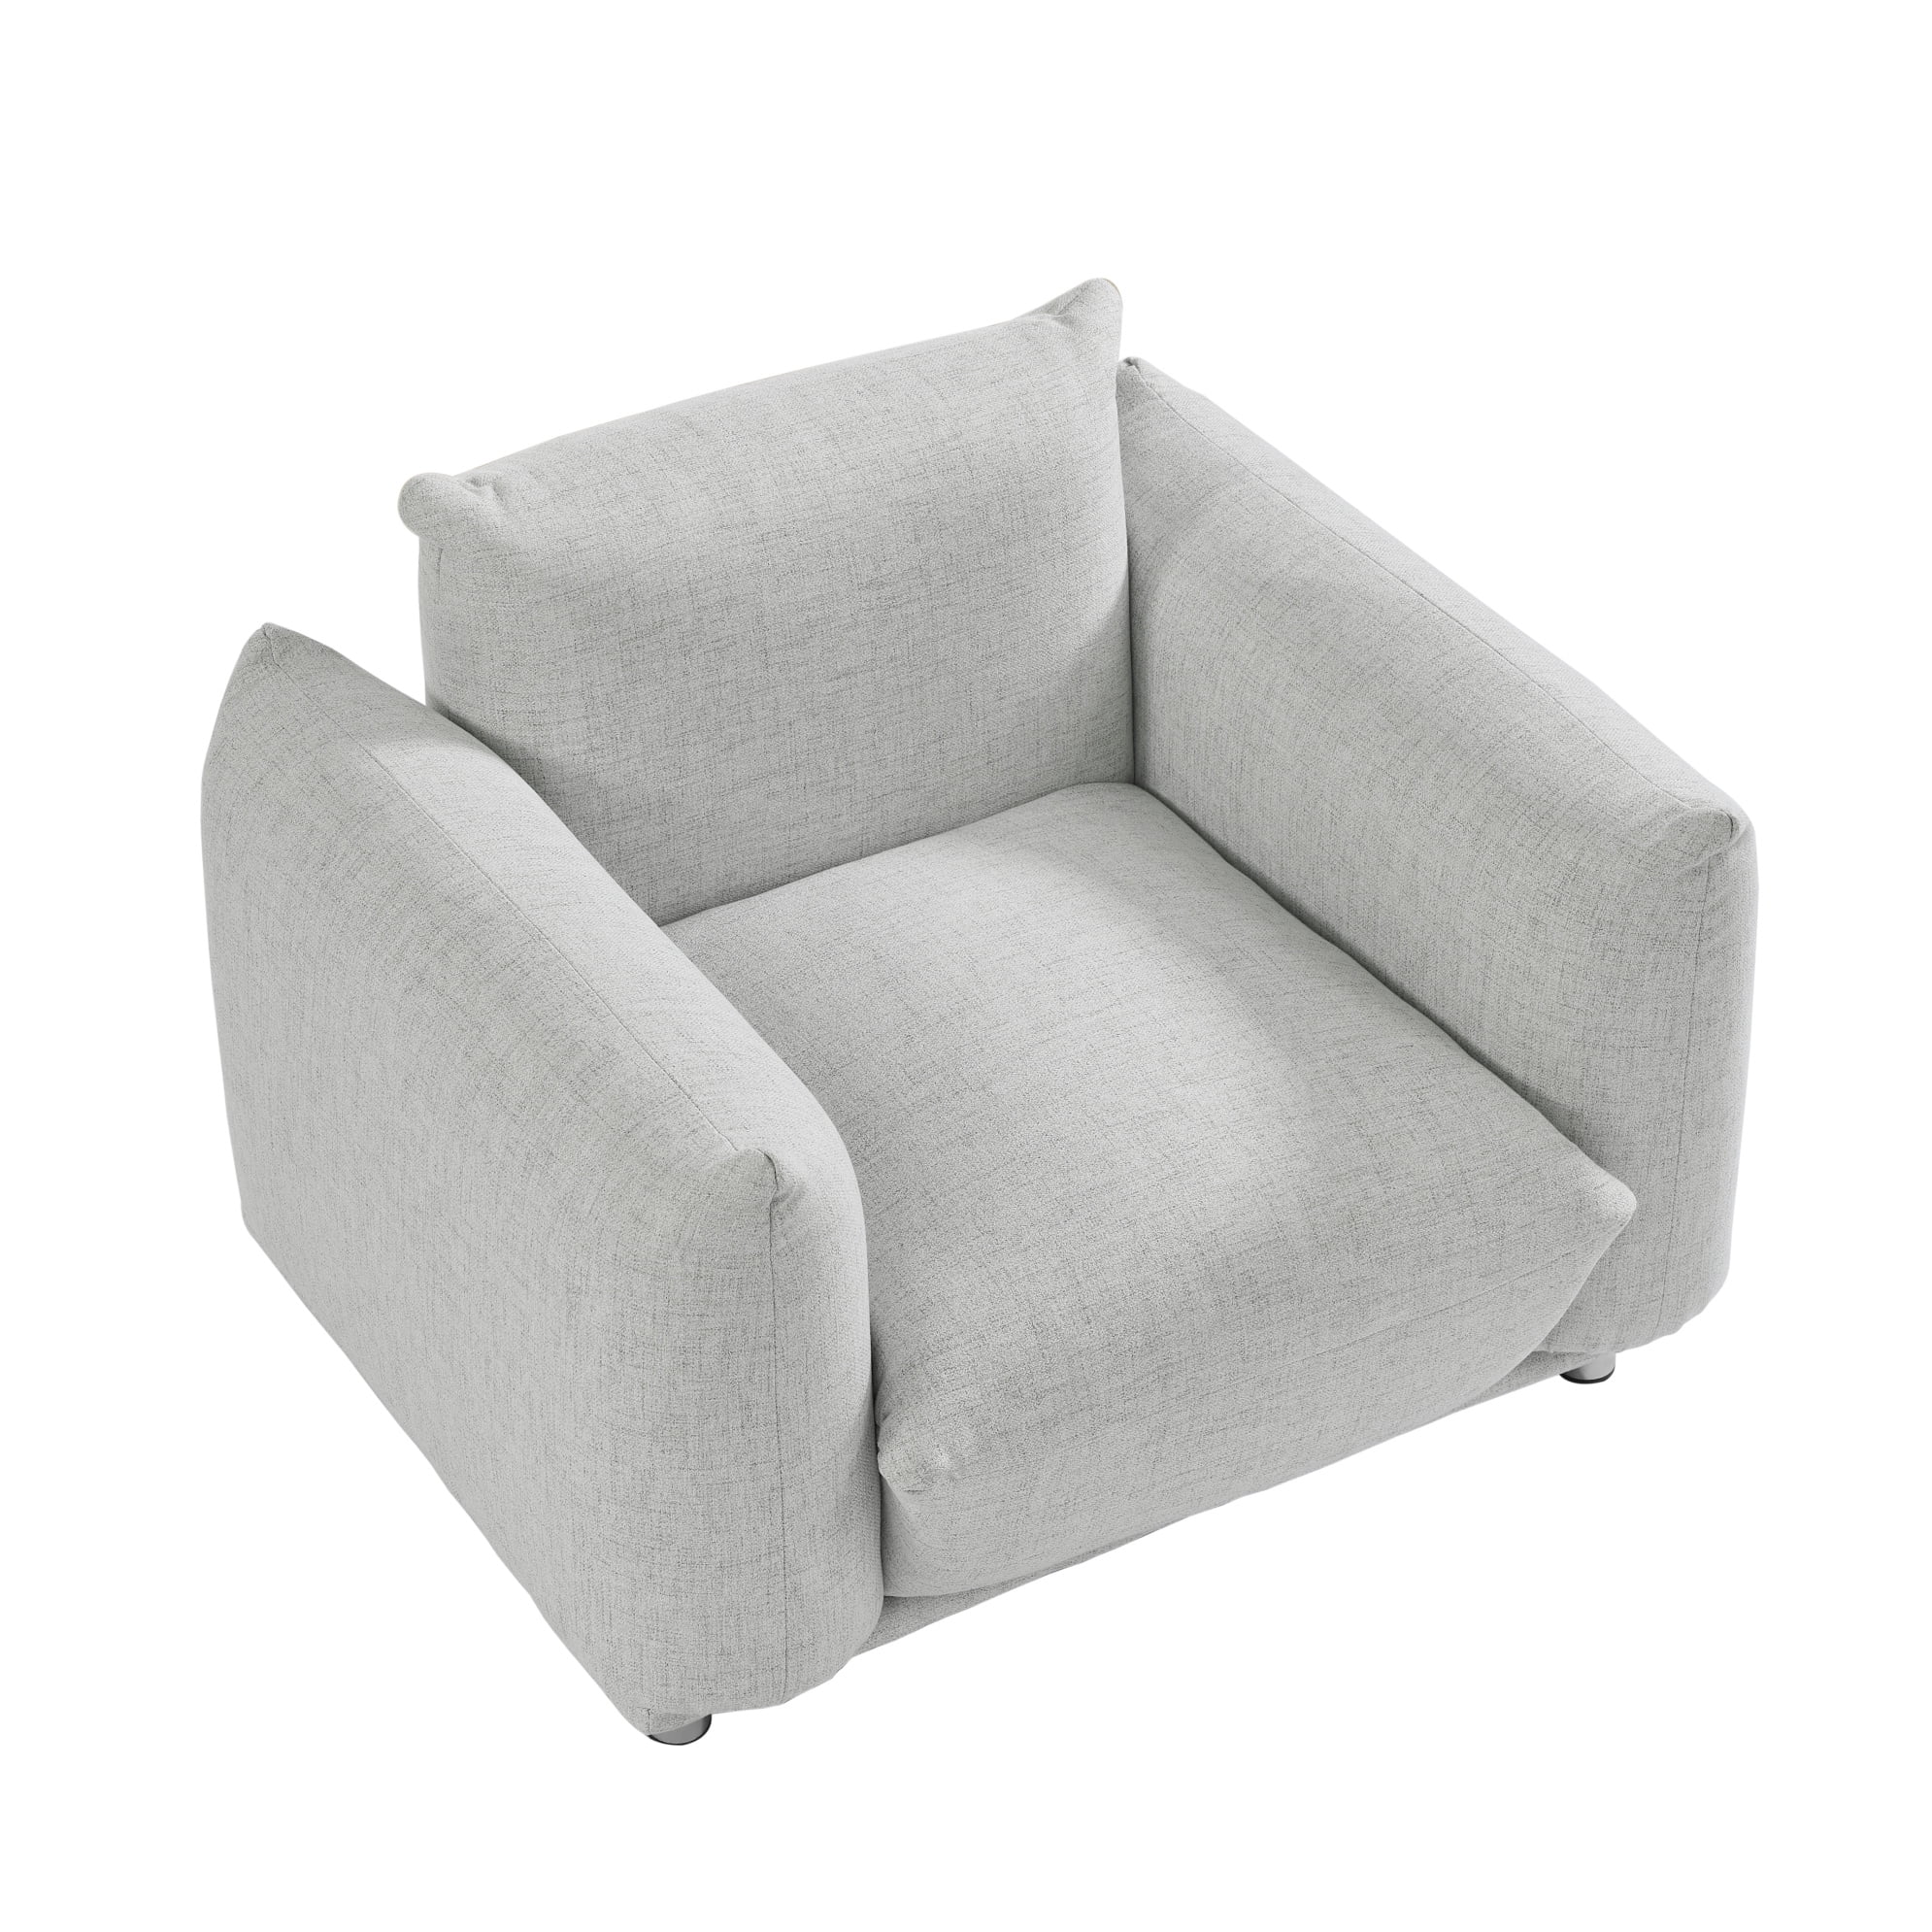 Lohoms Sherpa Accent Chair White Teddy Fabric Upholstered Comfortable Arm Chair Fluffy Comfy for Reading in Bedroom, Living Room, Small Sofa Chair